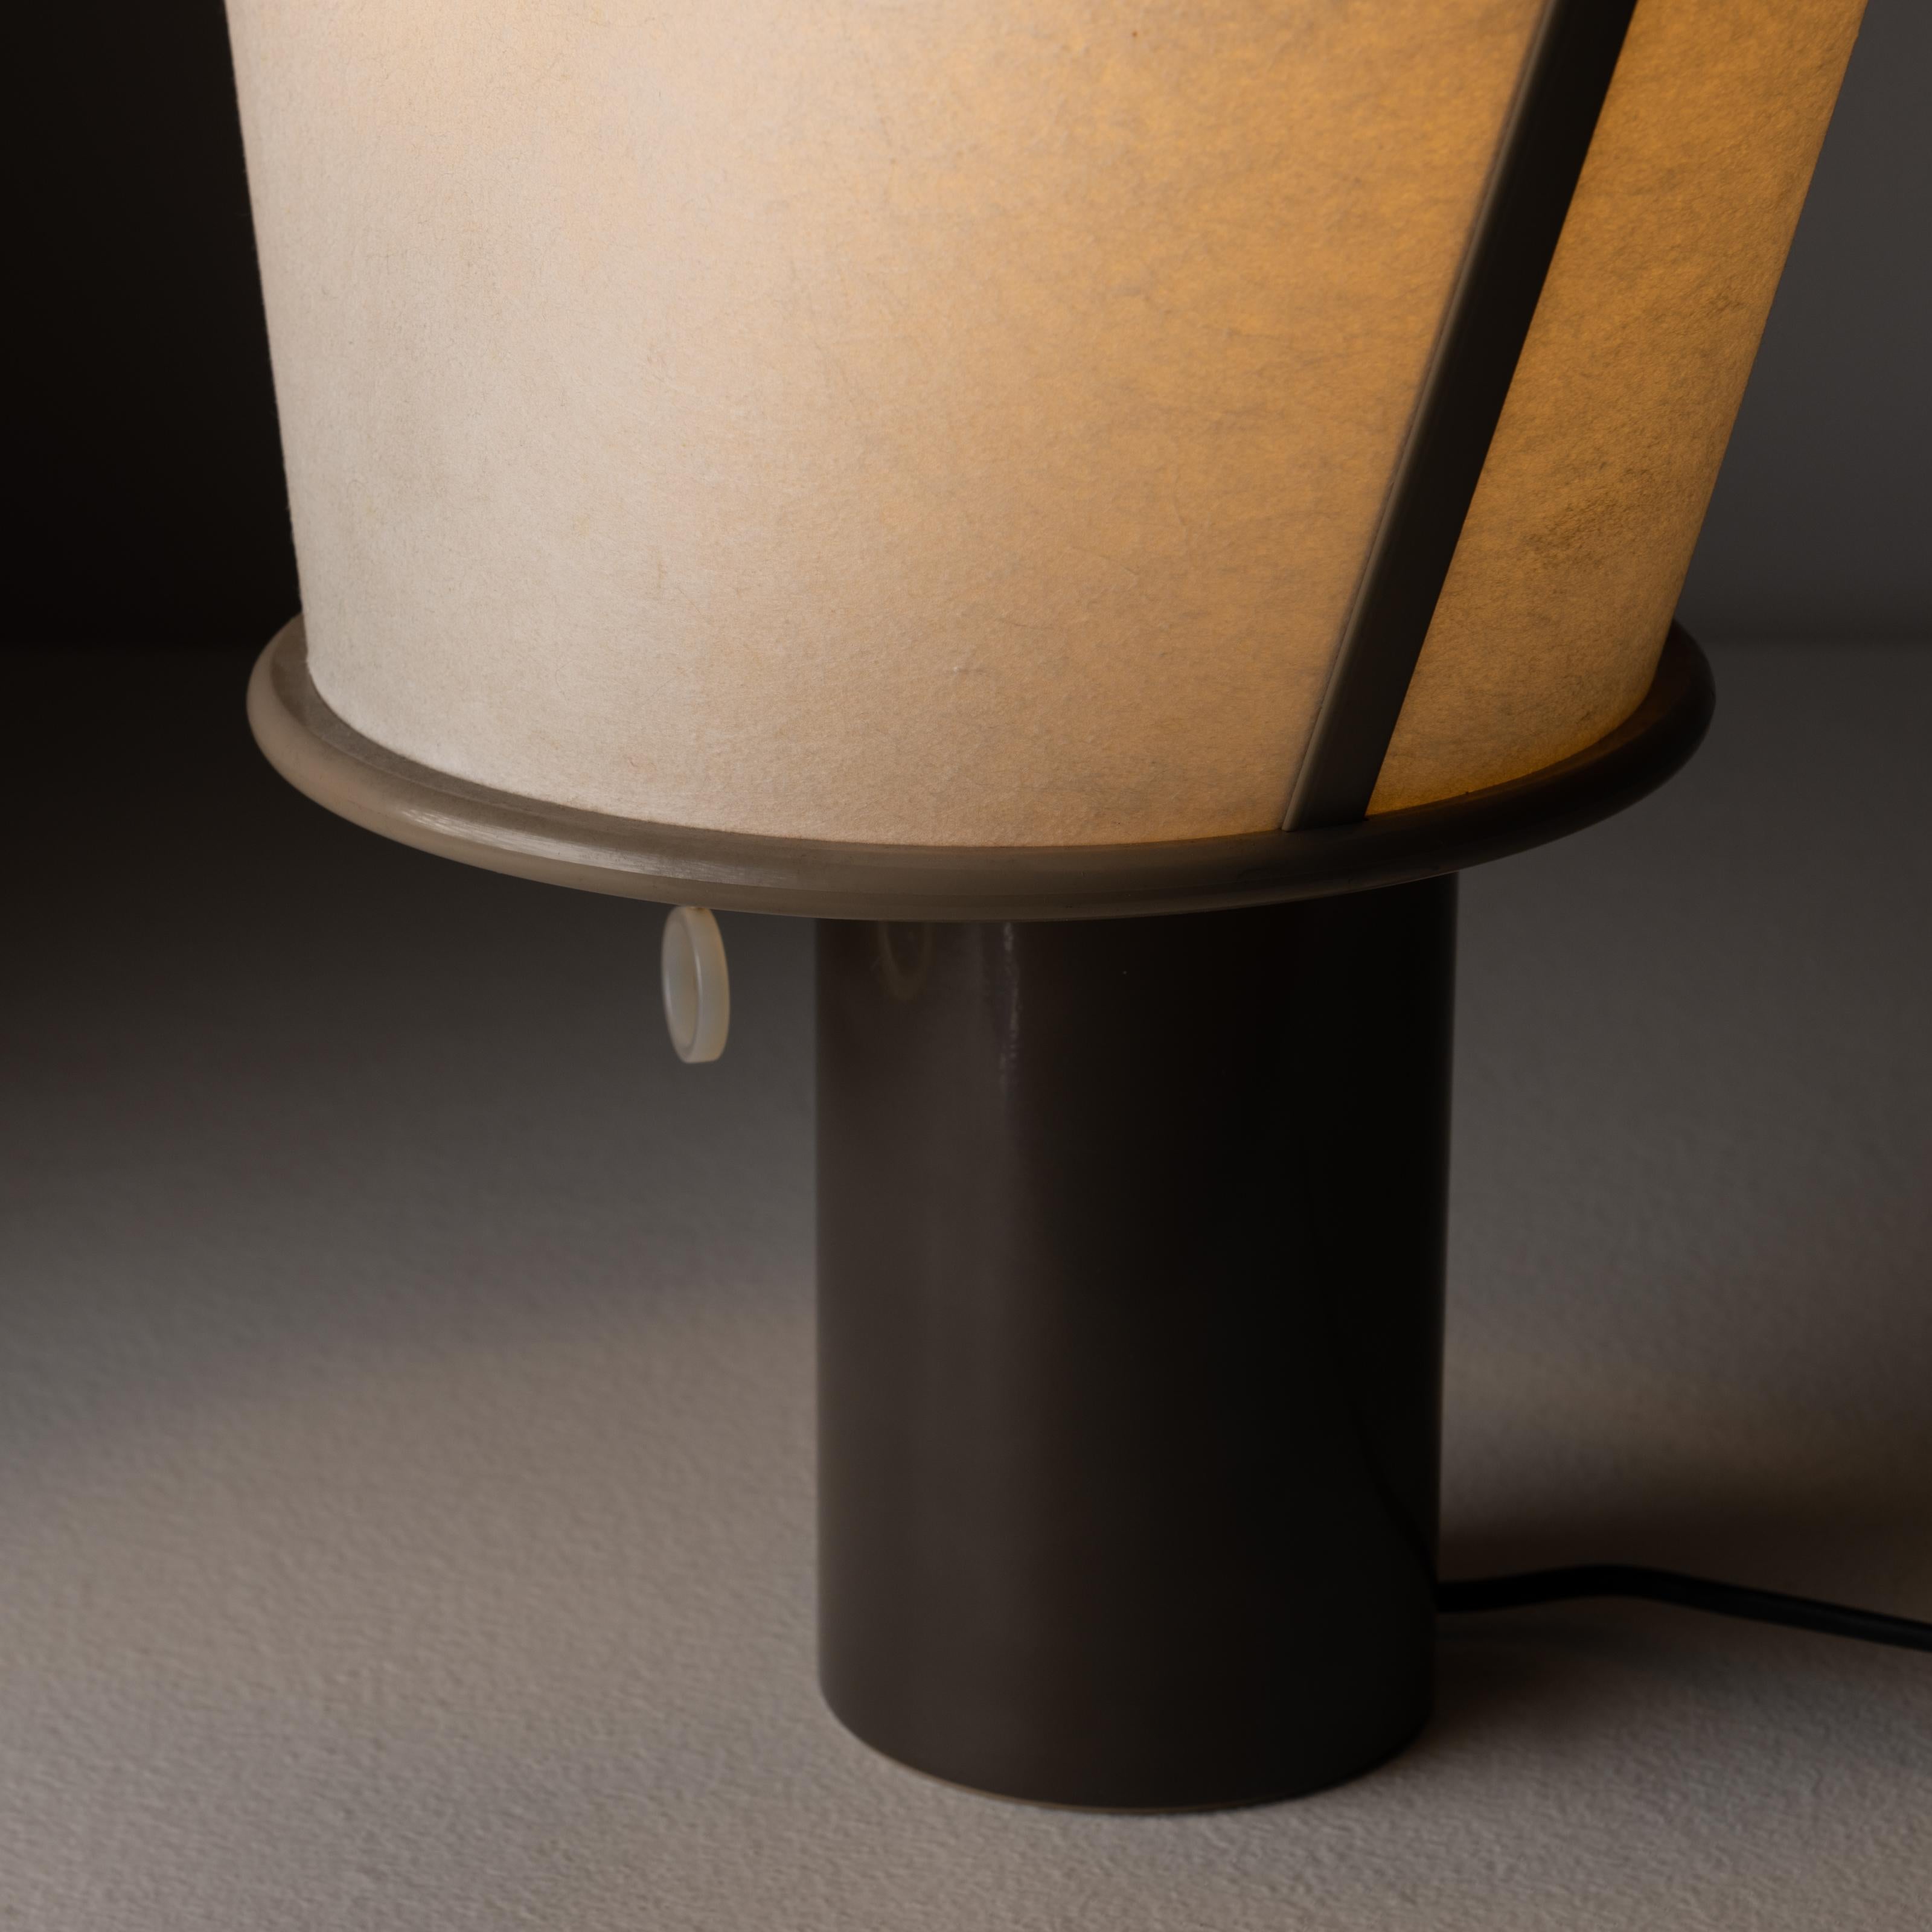 Late 20th Century Dolly a 200 Desk Lamp by King & Miranda for Arteluce